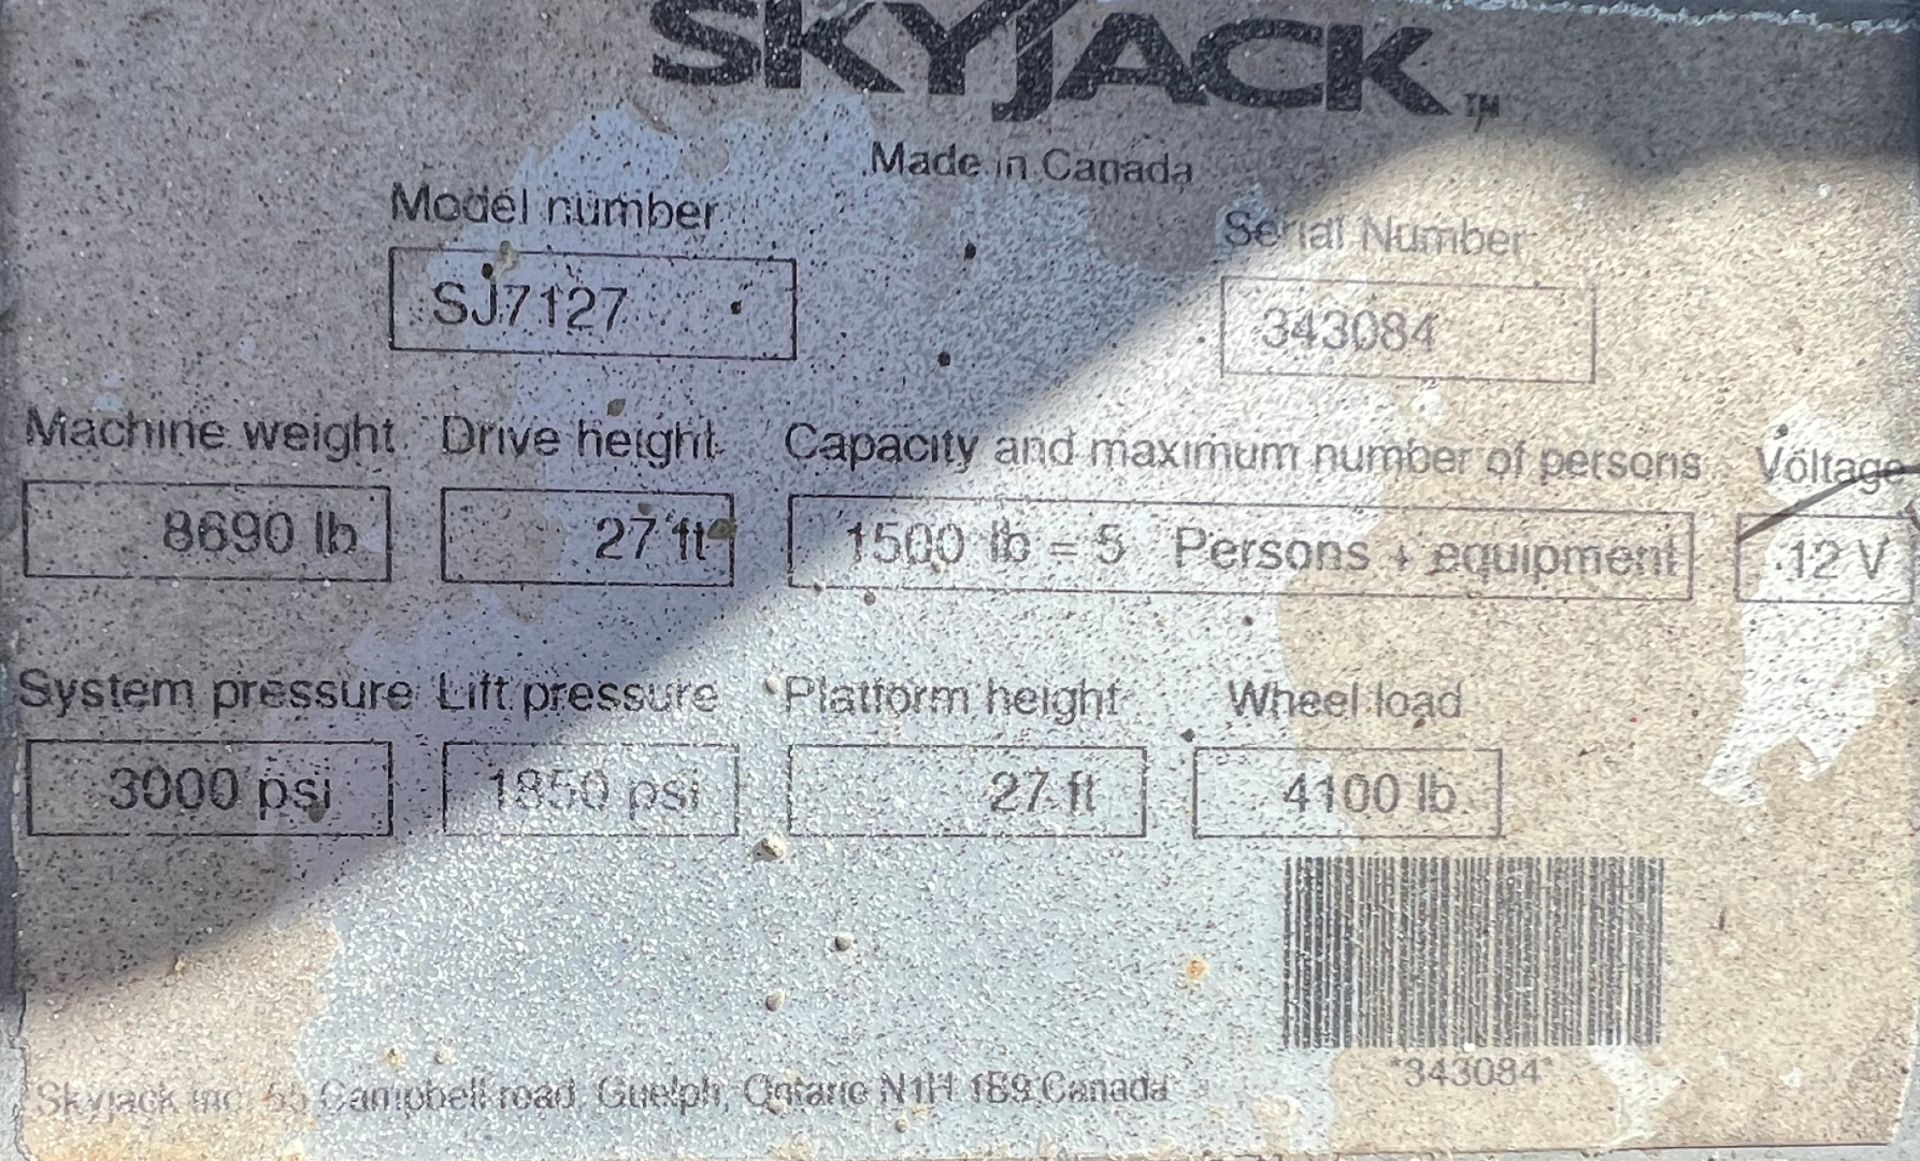 2006- 27 FT ELECTRIC SKYJACK LIFT - Image 4 of 4